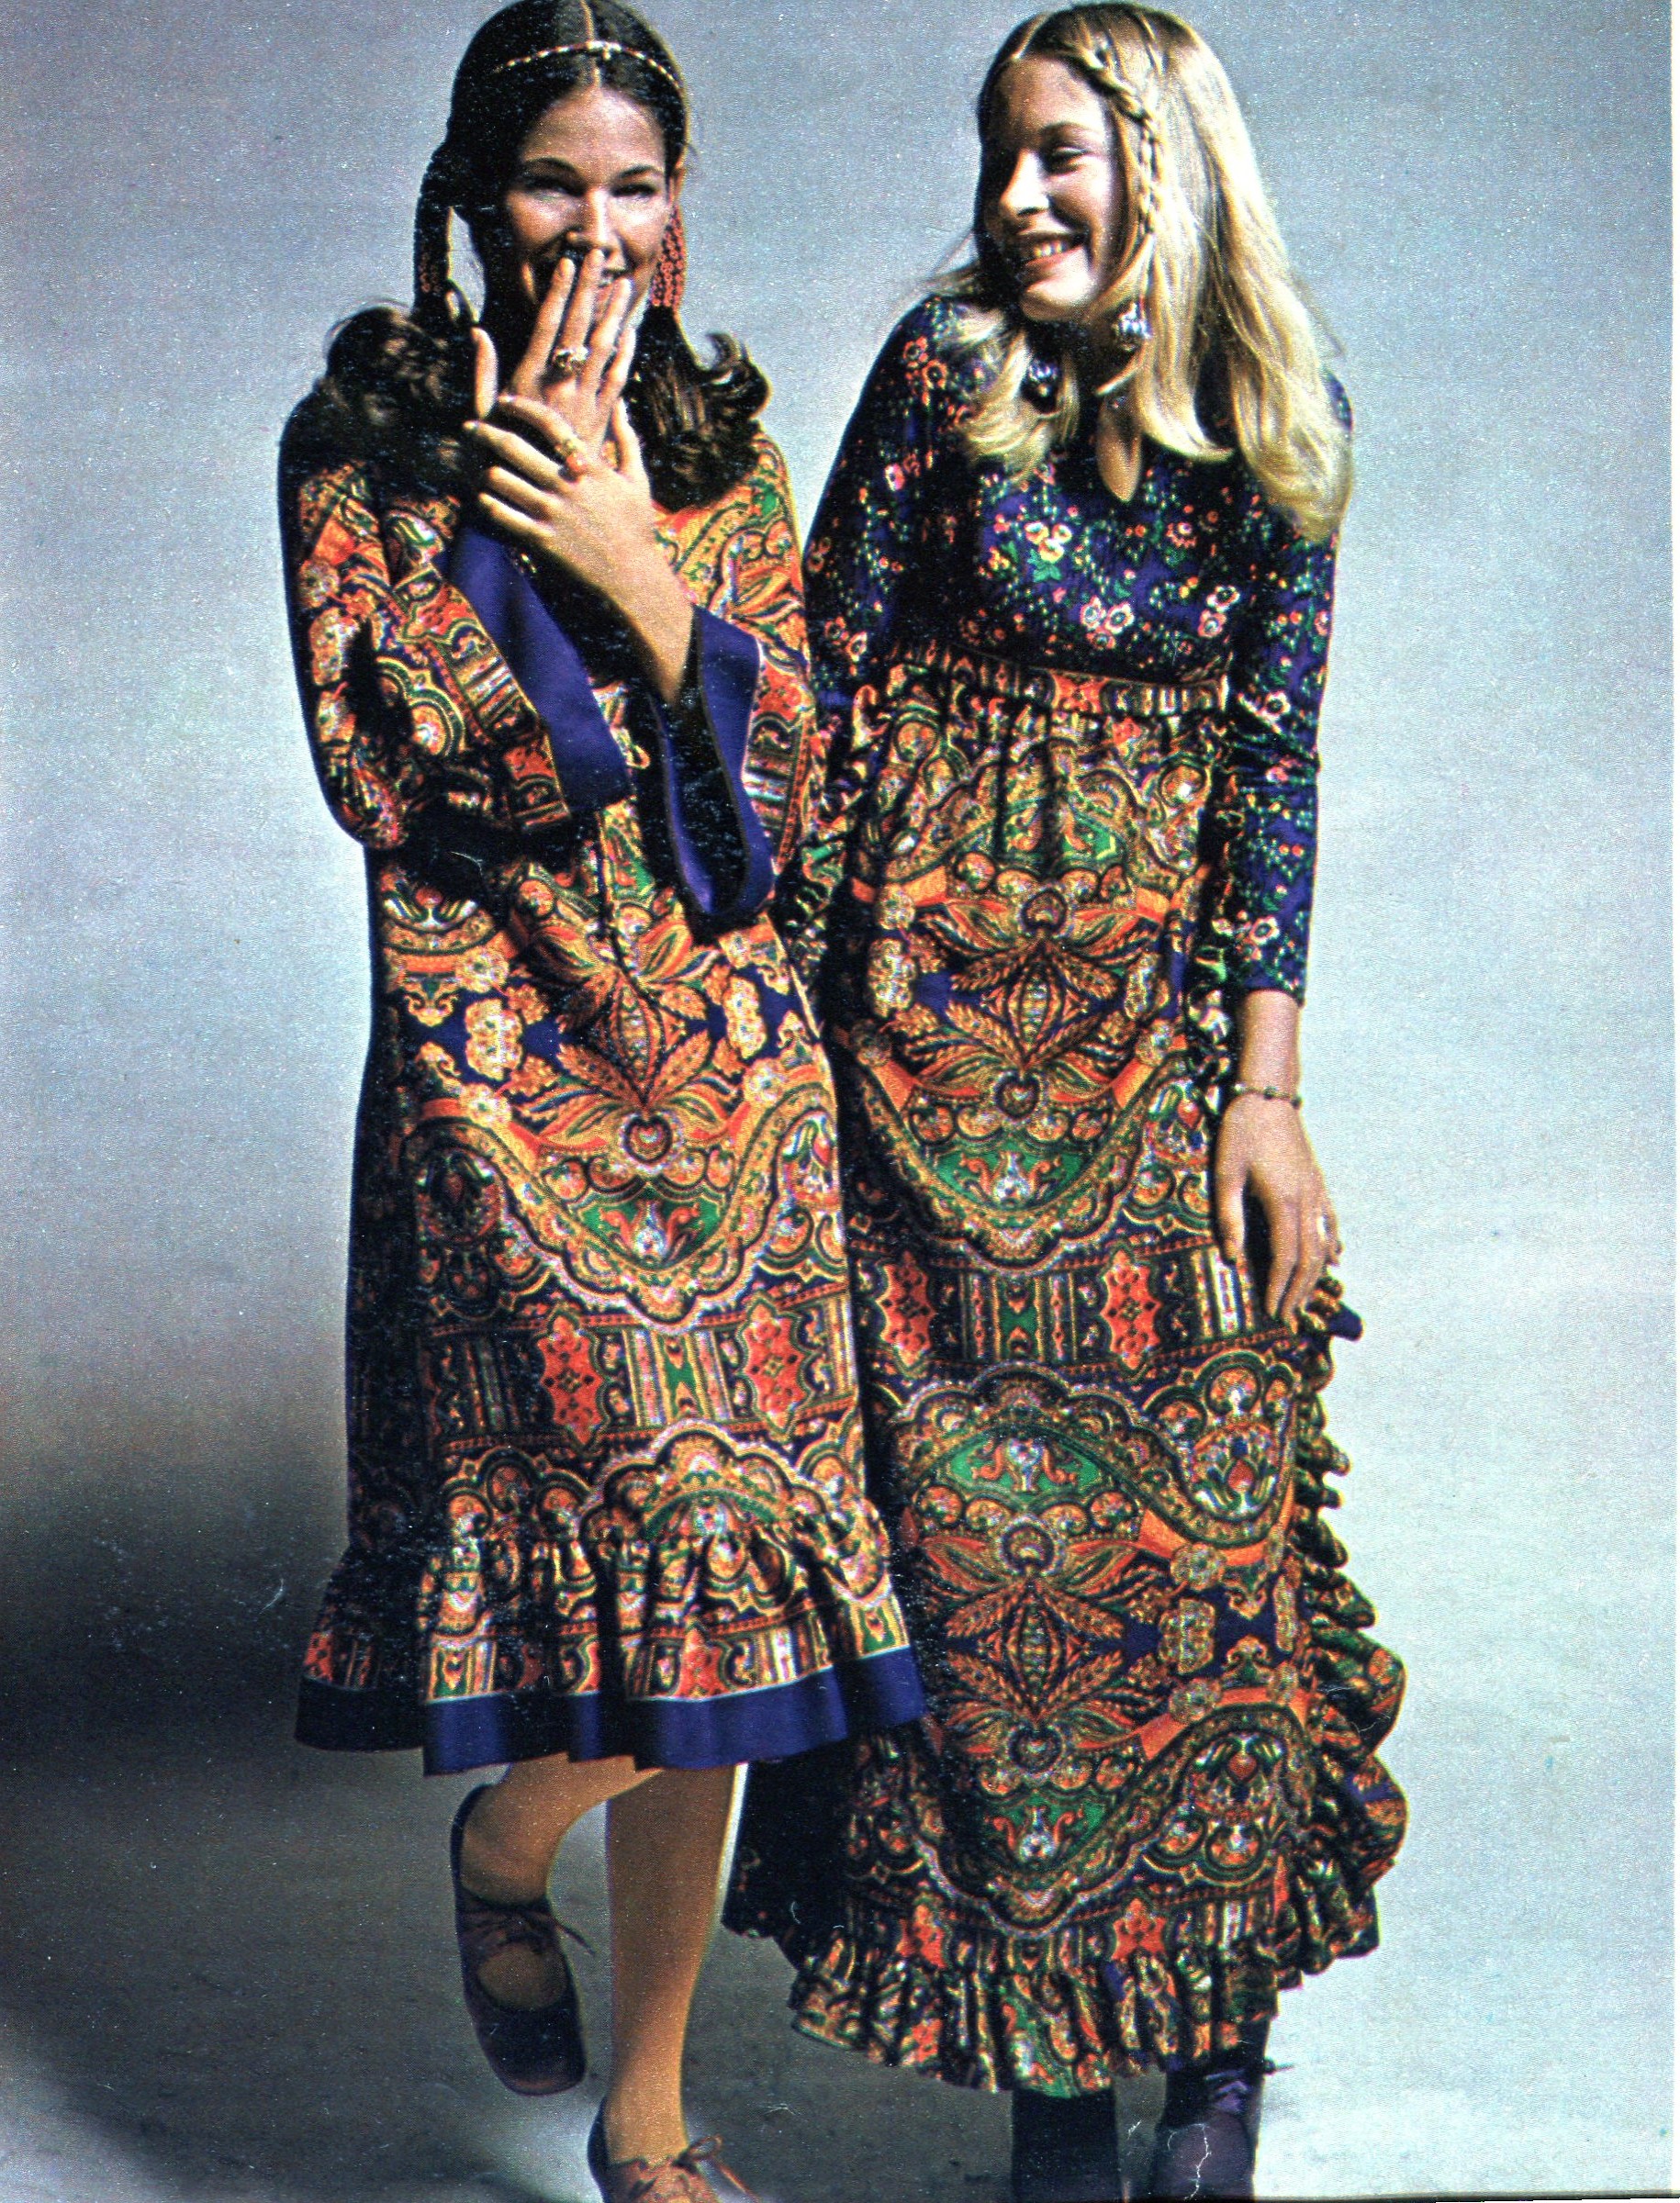 Fashion in the 1970s: Clothing Styles, Trends, Pictures & History